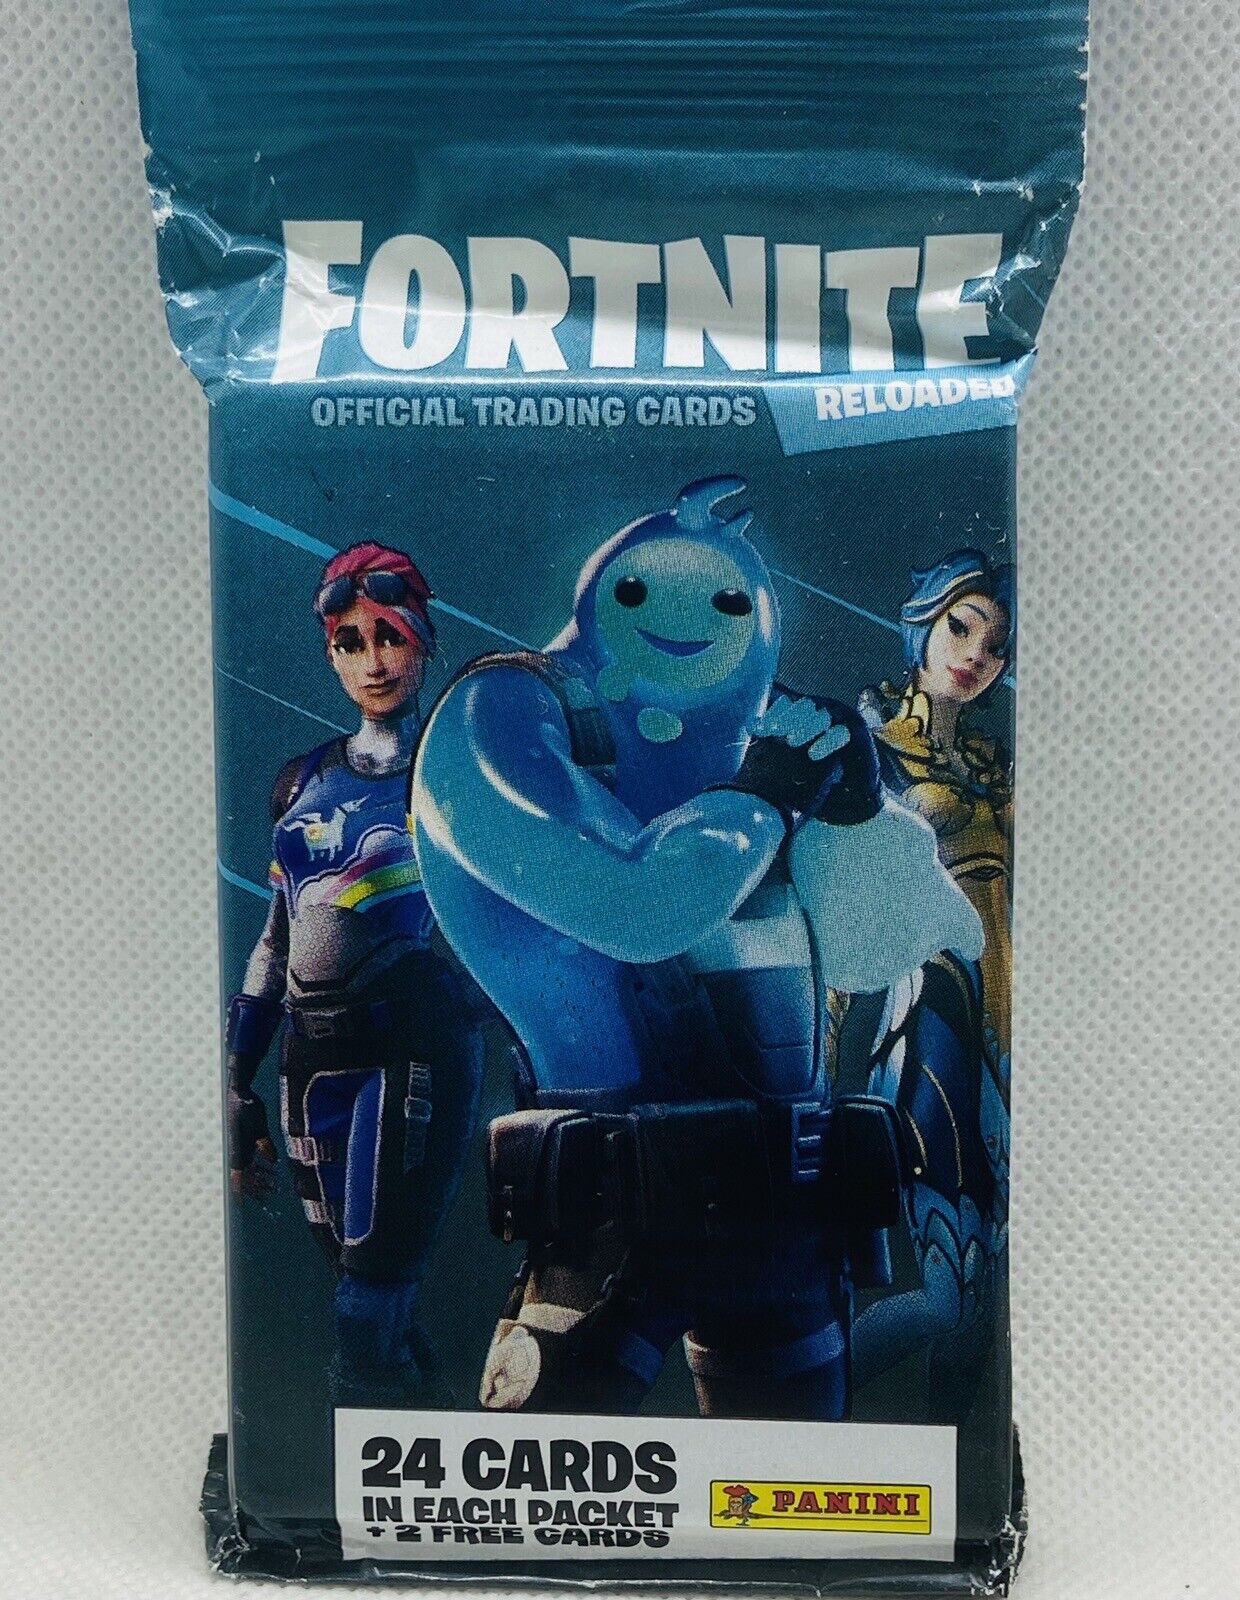 x2 Panini Fortnite Reloaded Series 2 Fat Packs Trading Cards (48 Cards )